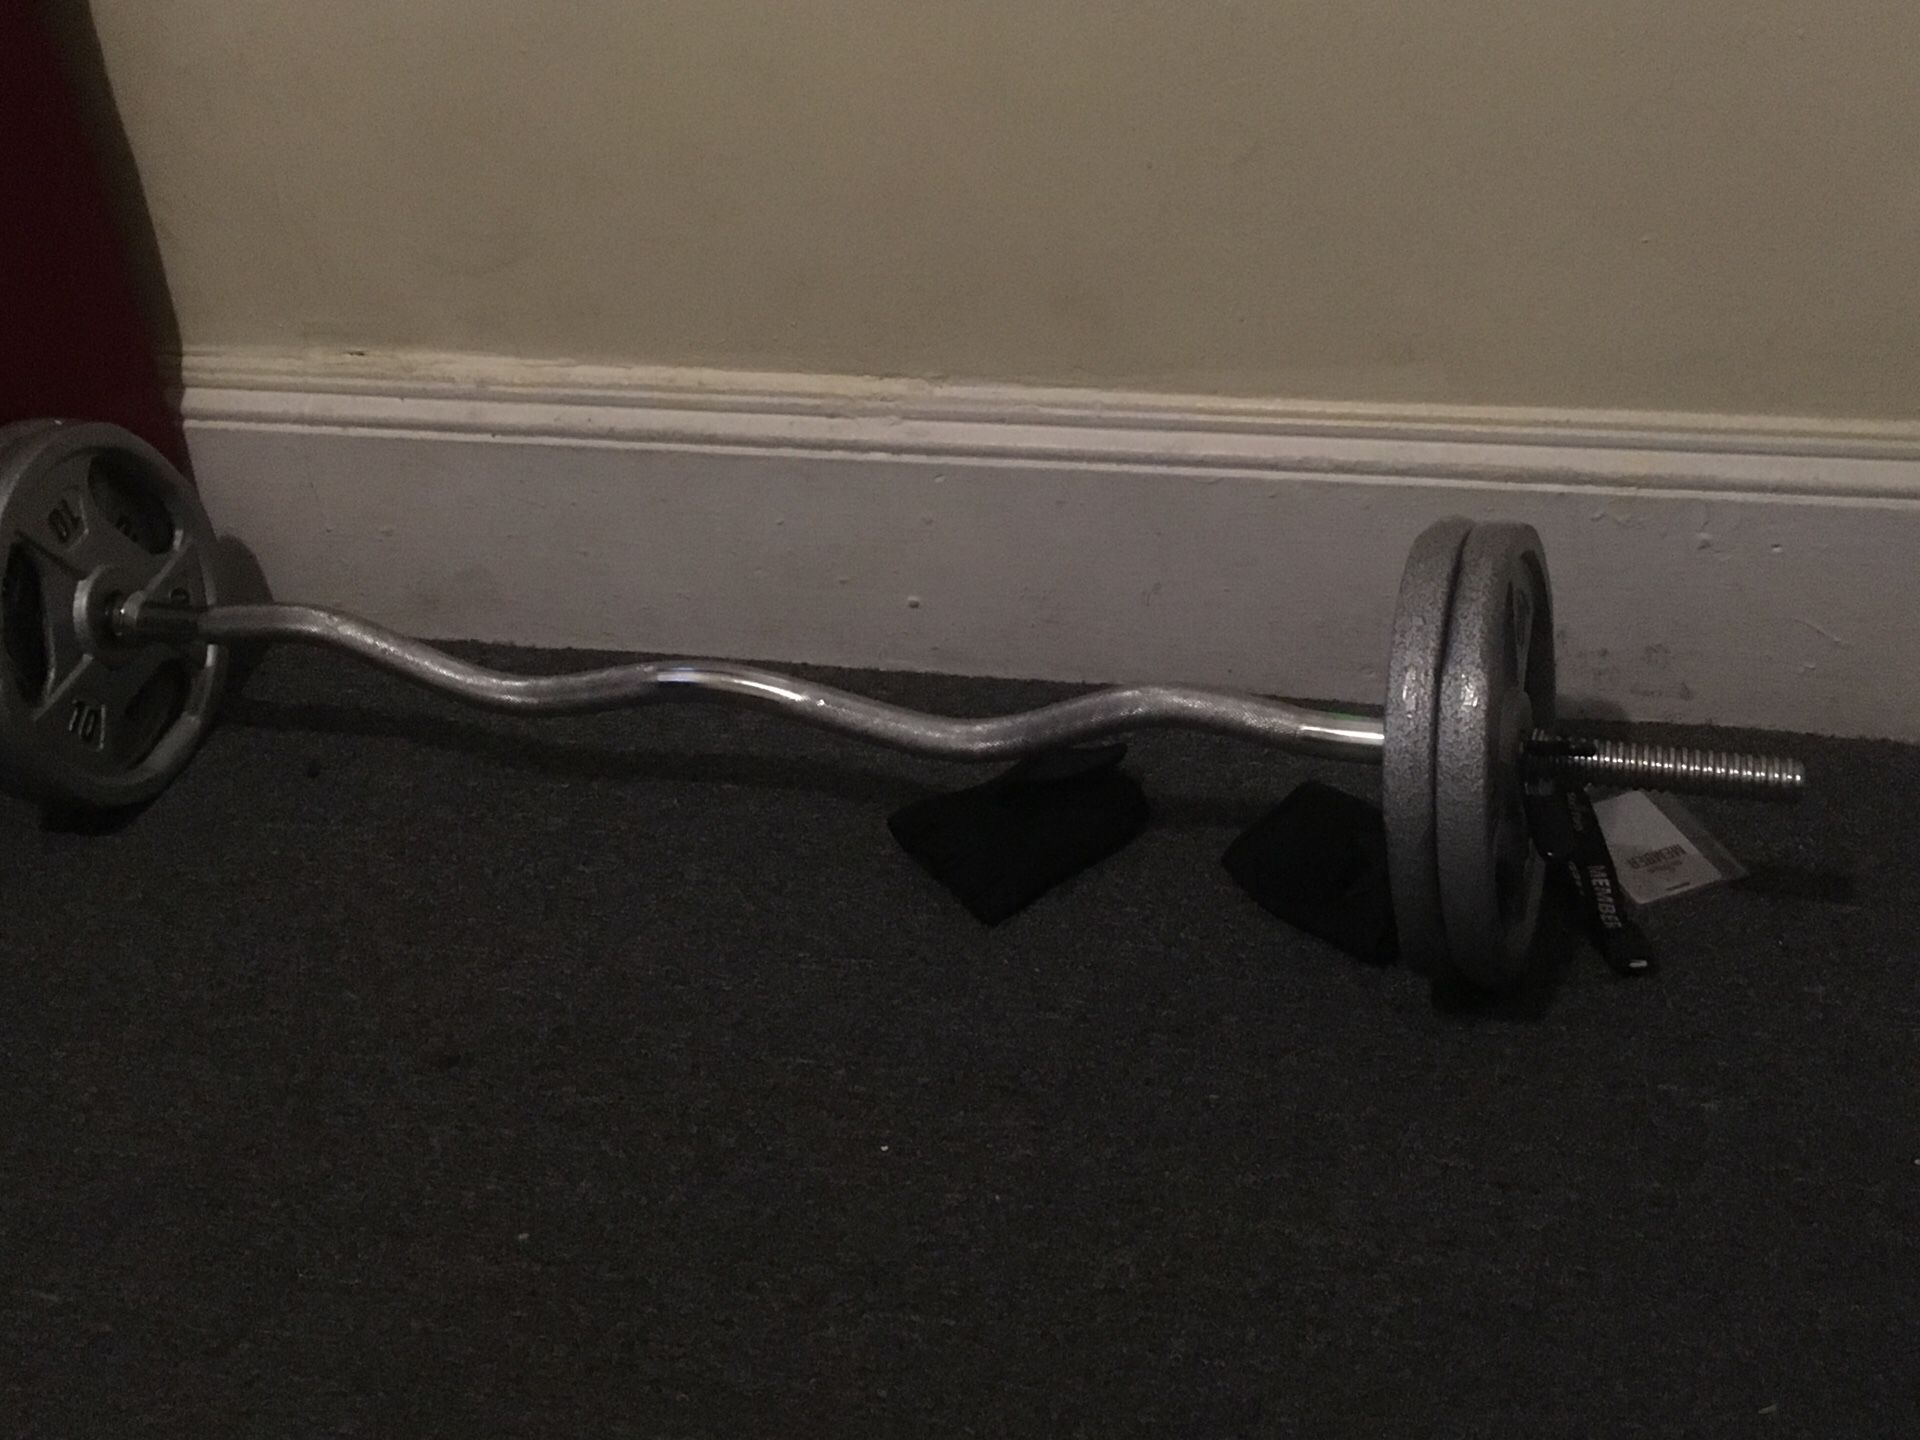 Bar +clamps + weights (40lbs)